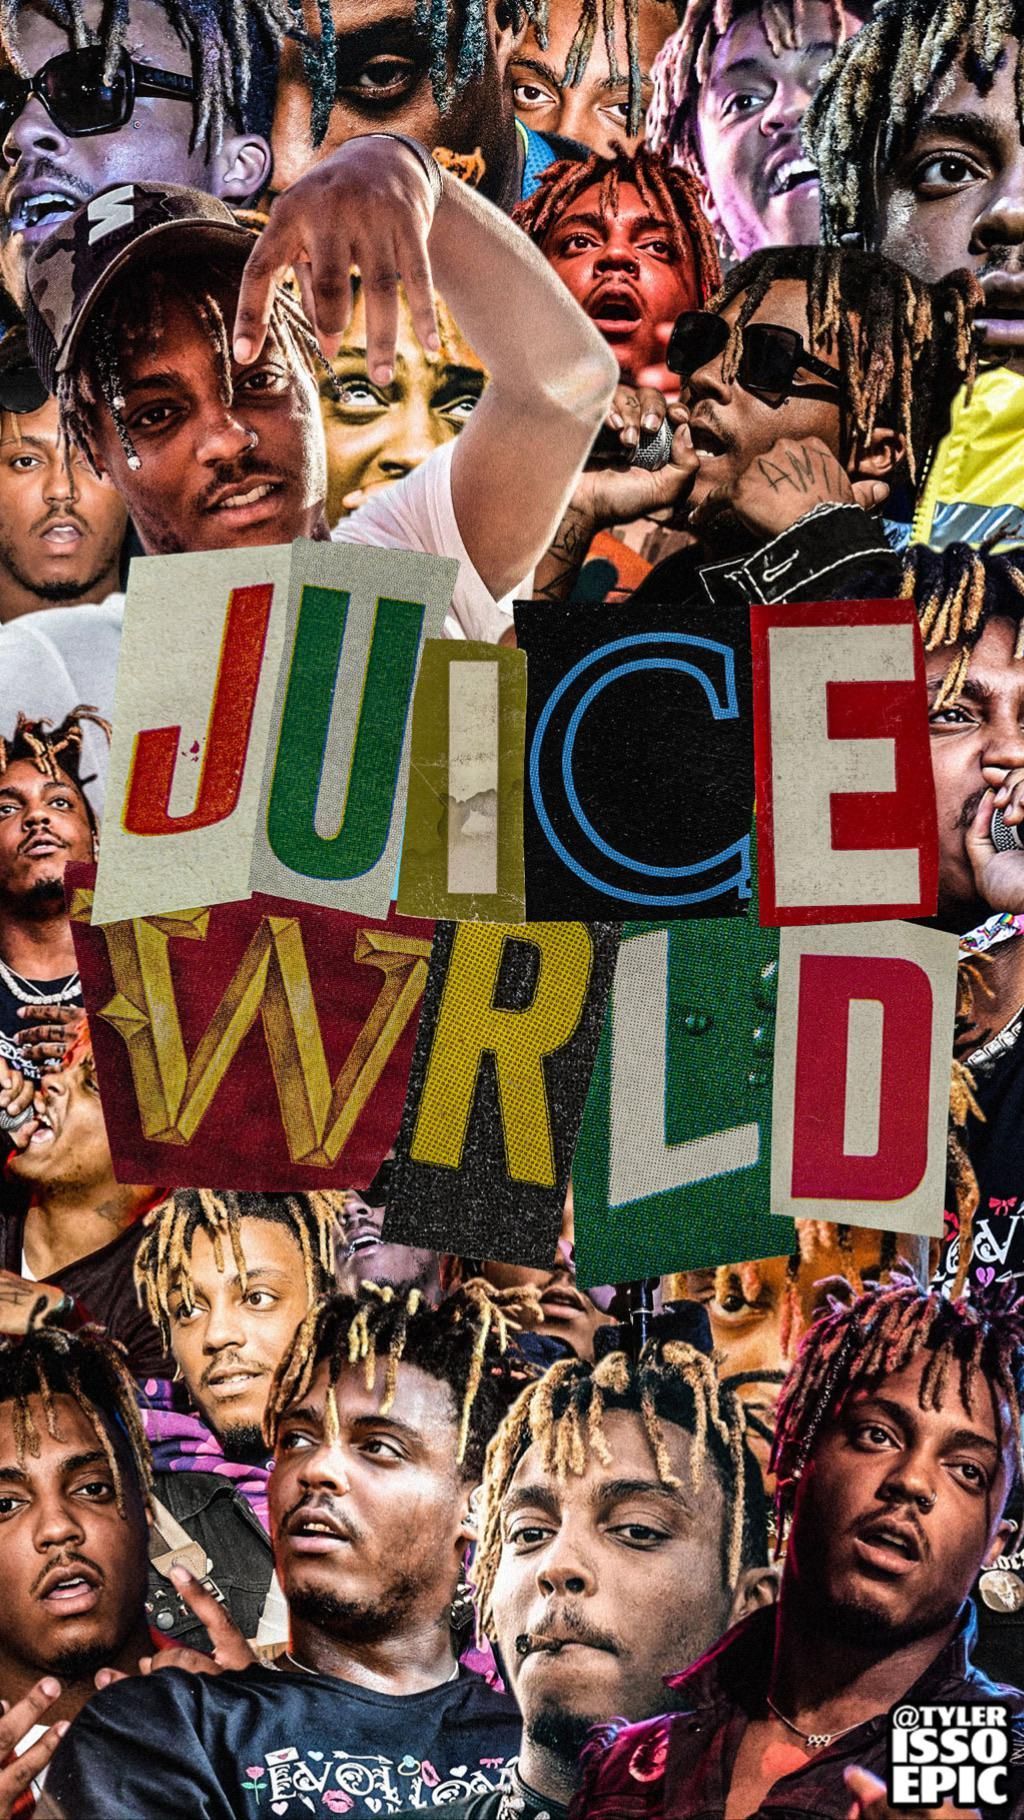 juice wrld wallpaper for mobile phone, tablet, desktop computer and other devices HD and 4K wallpaper. Rap wallpaper, Rapper wallpaper iphone, Juice